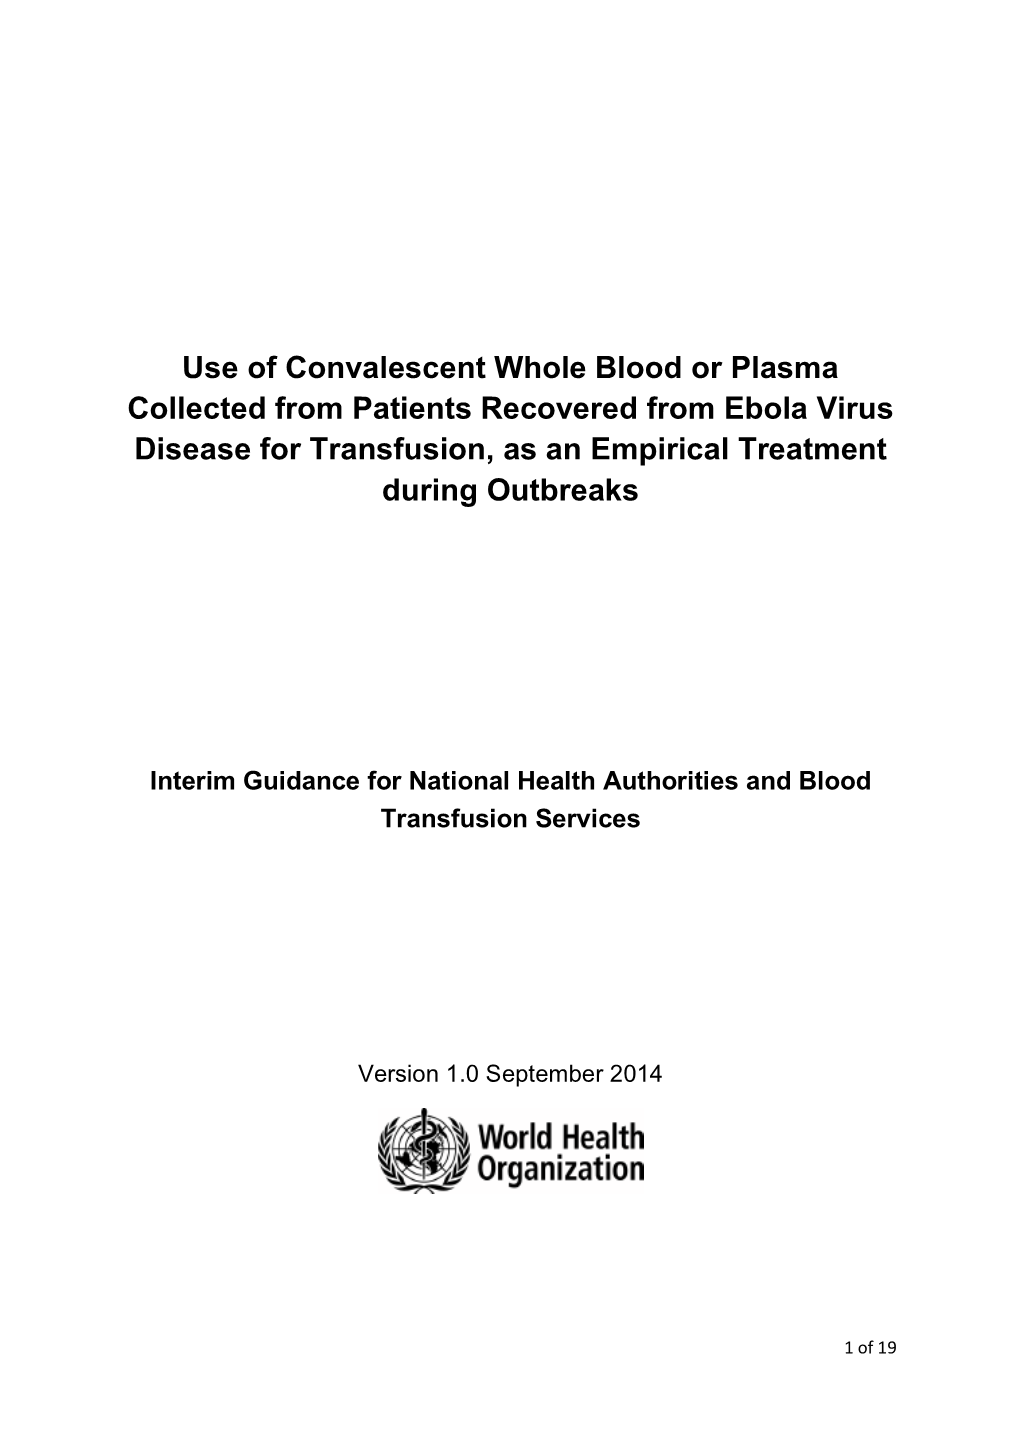 Use of Convalescent Whole Blood Or Plasma Collected from Patients Recovered from Ebola Virus Disease for Transfusion, As an Empirical Treatment During Outbreaks